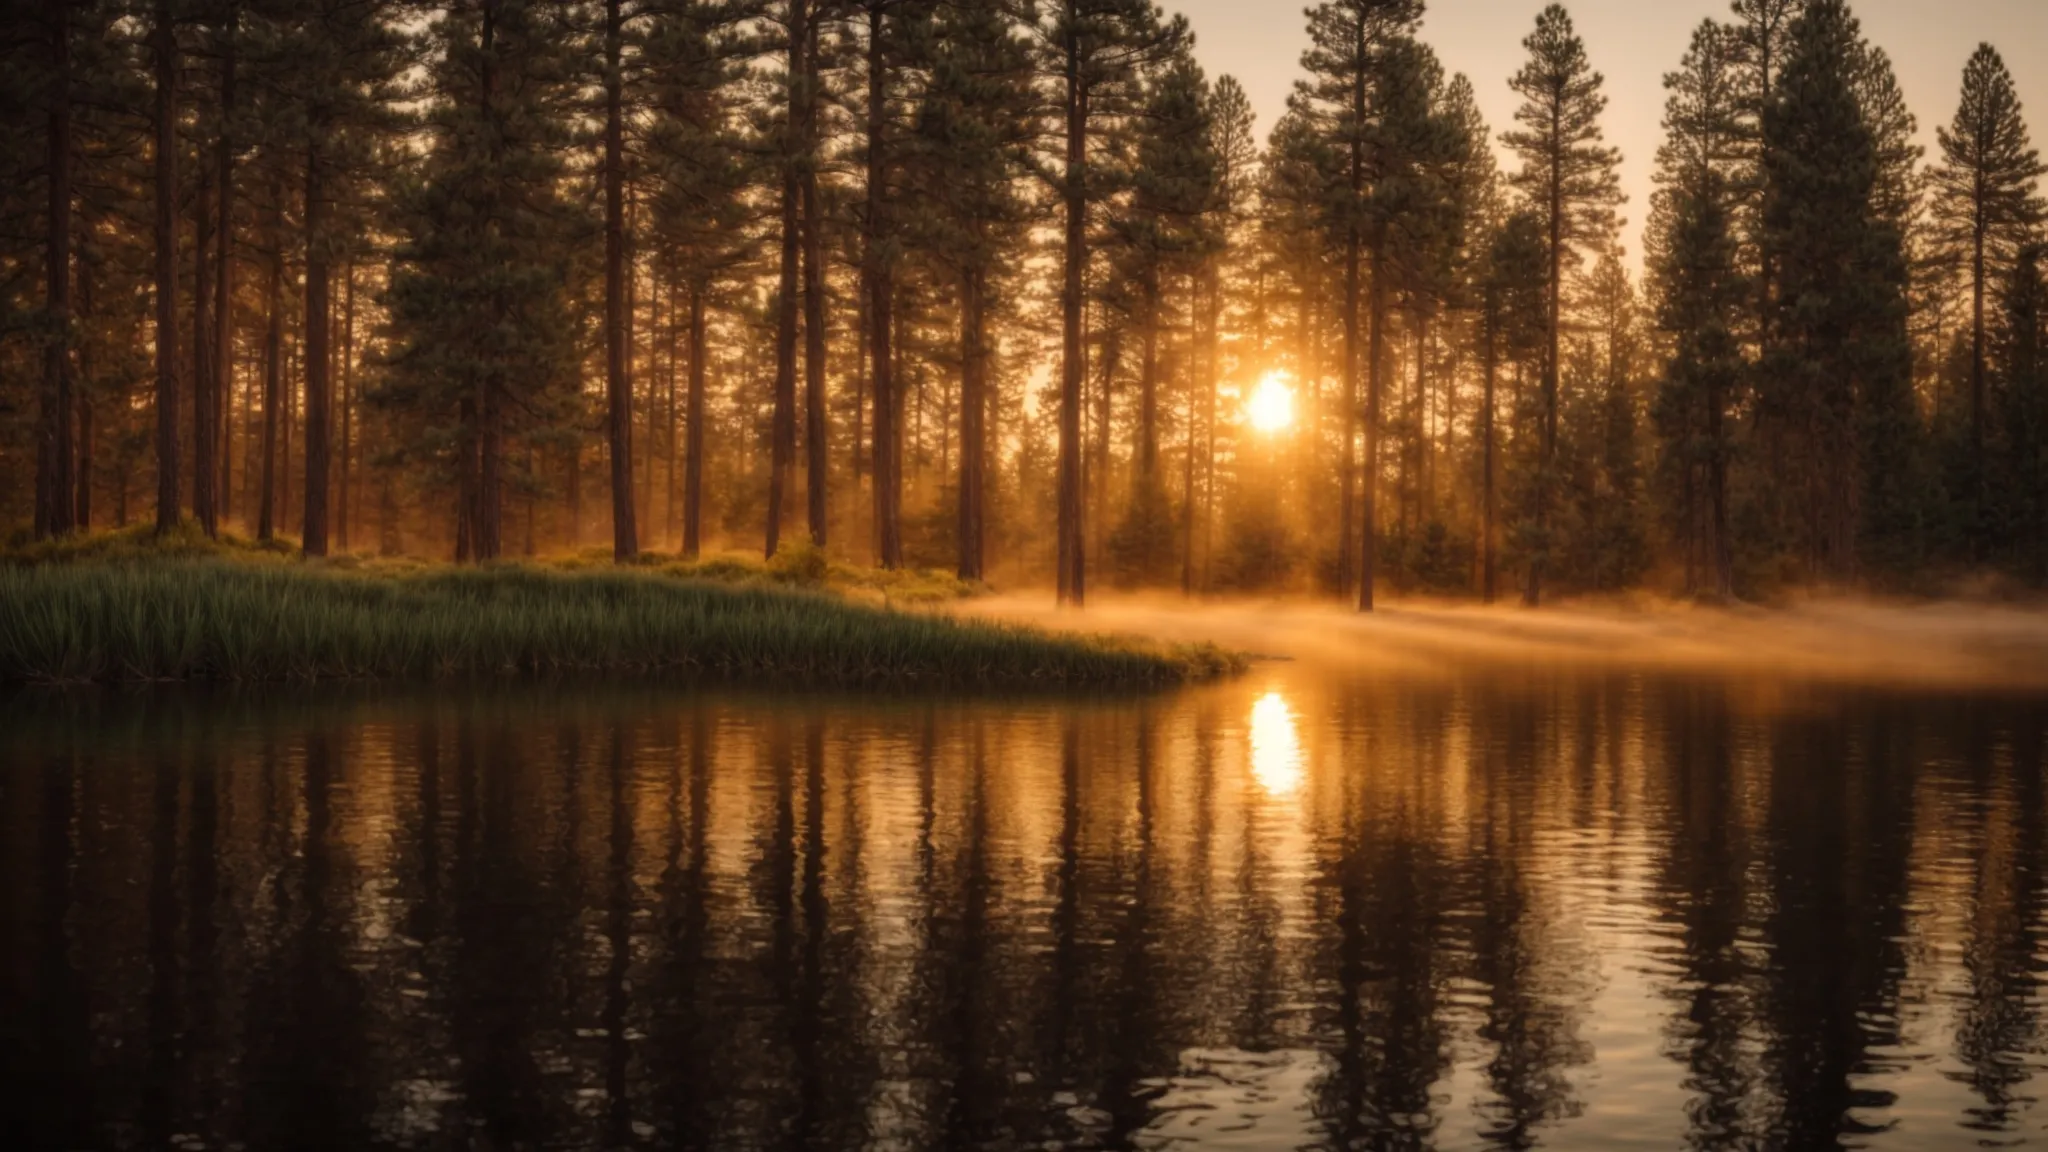 a golden sunset bathes a serene lake surrounded by tall pine trees.